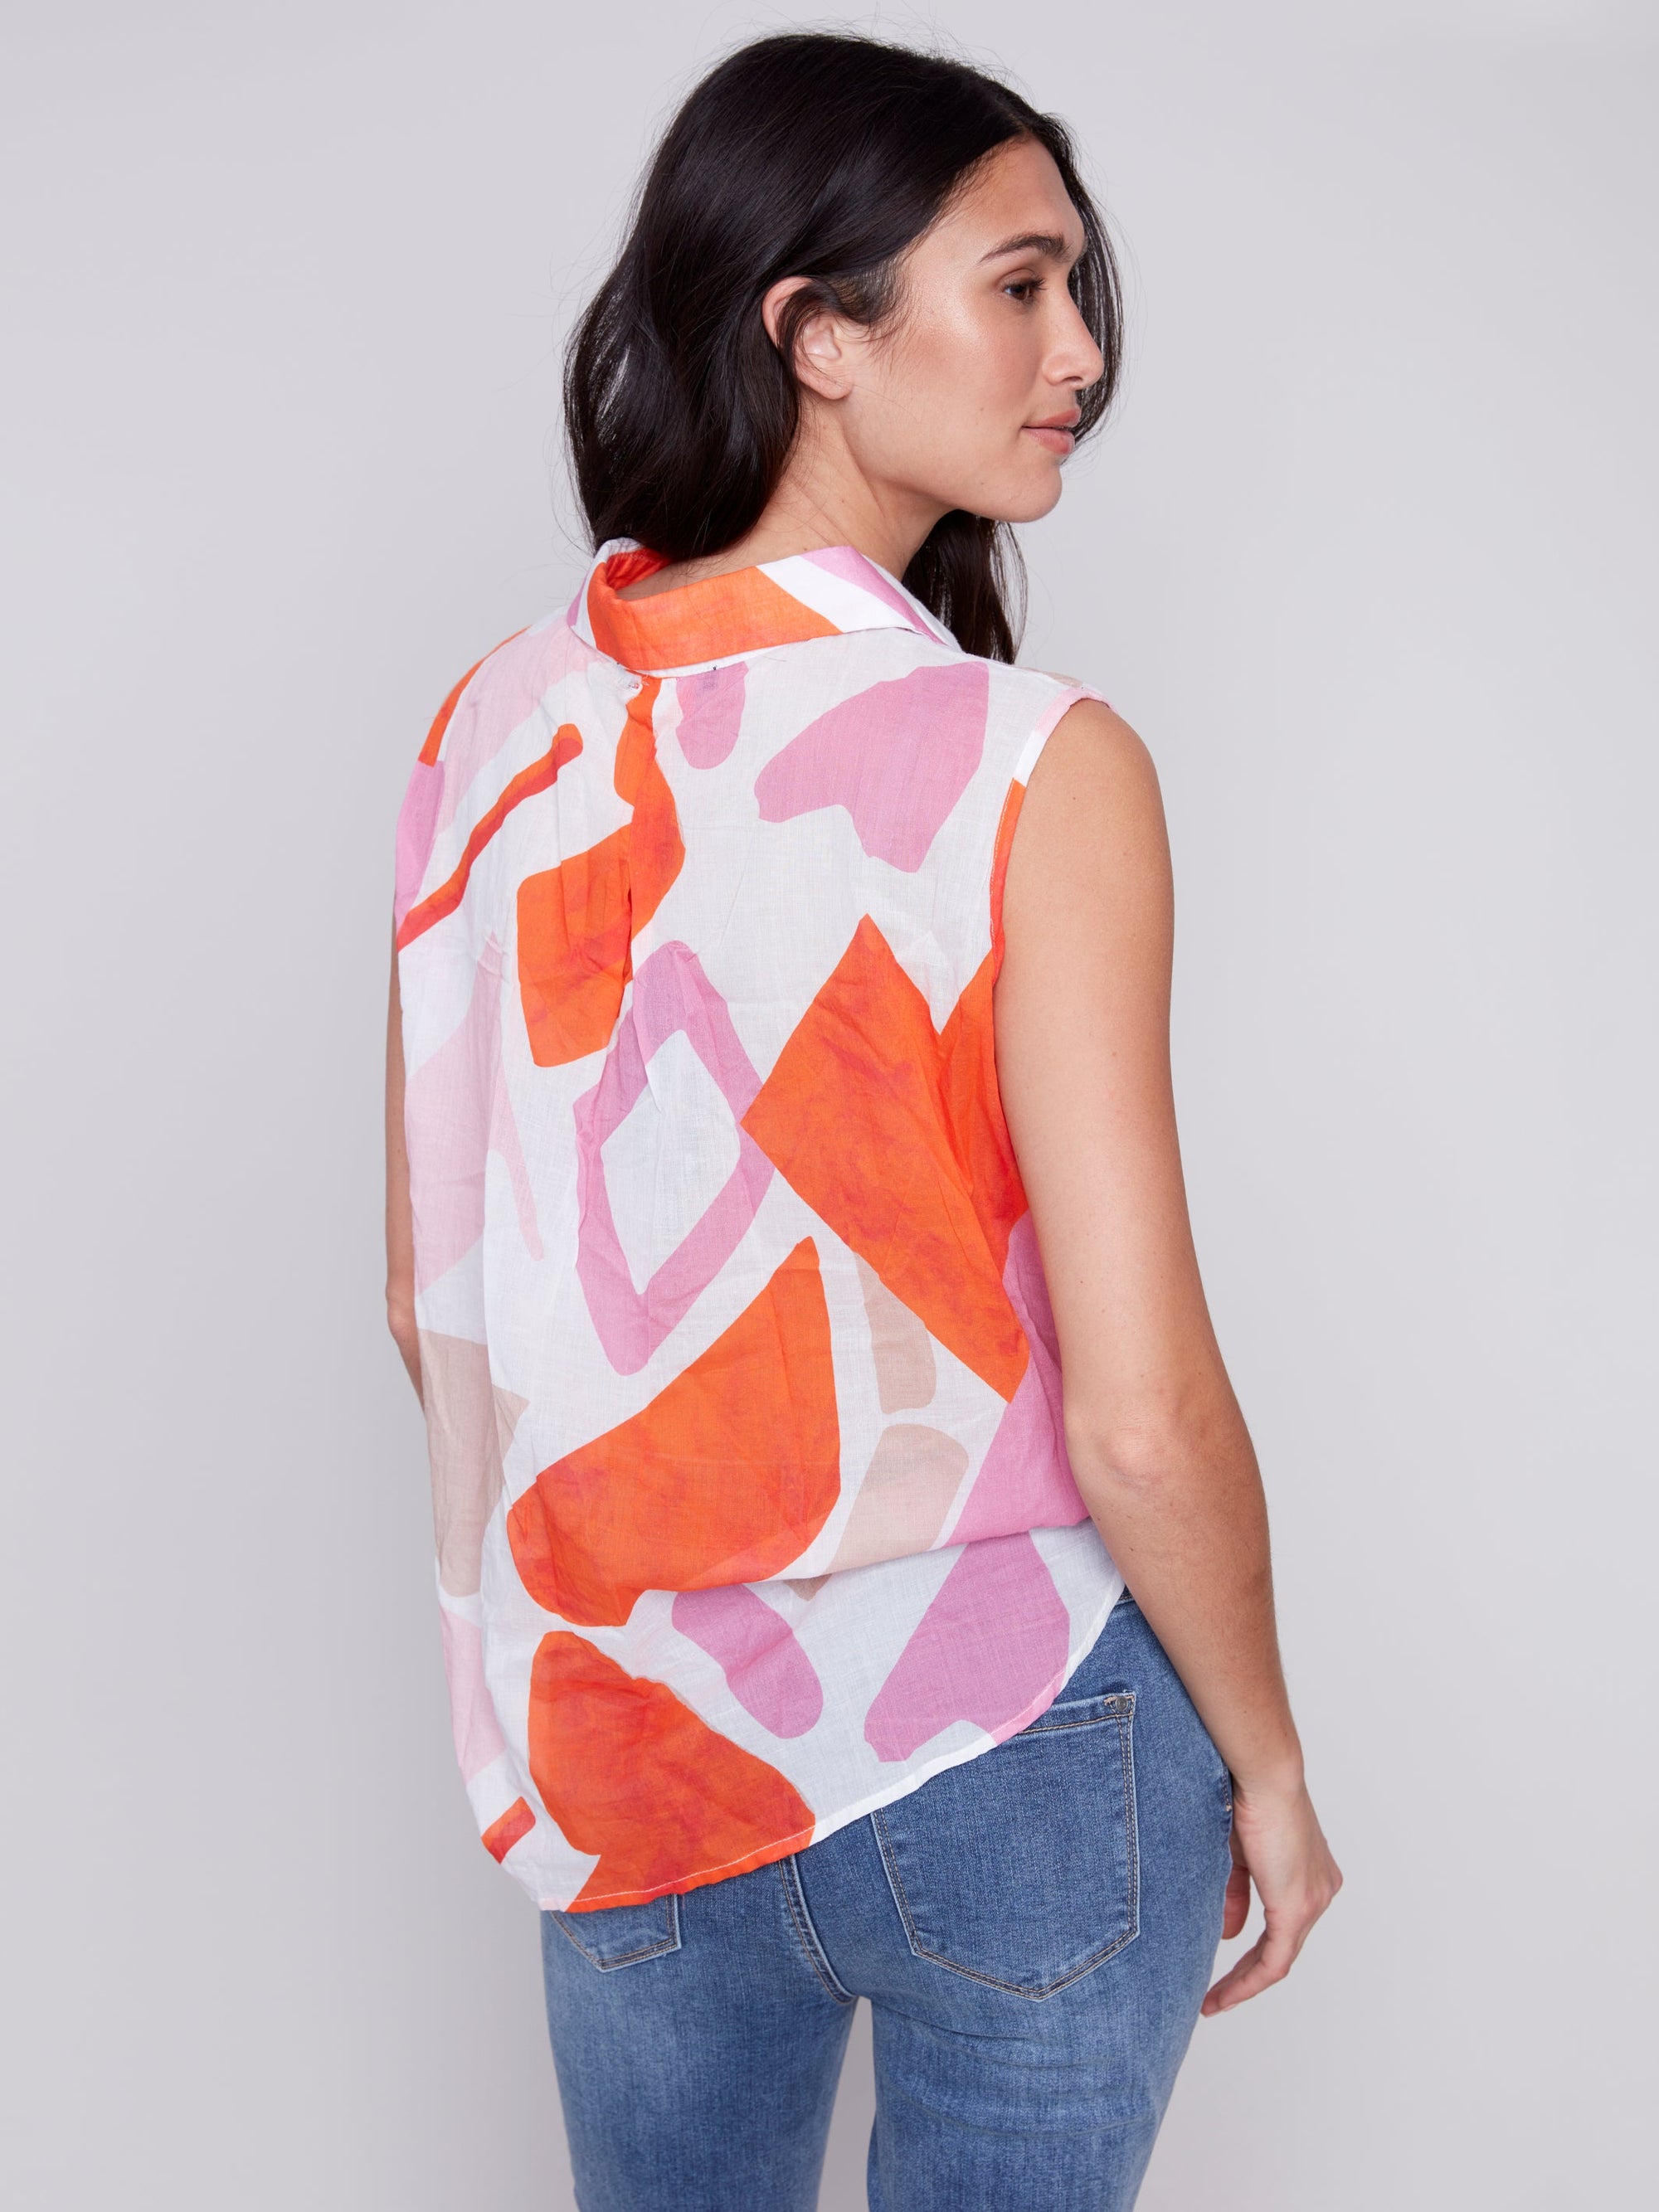 PRINTED VOILE SLEEVELESS TOP-Tops-CHARLIE B-XSMALL-ANISE-Coriander